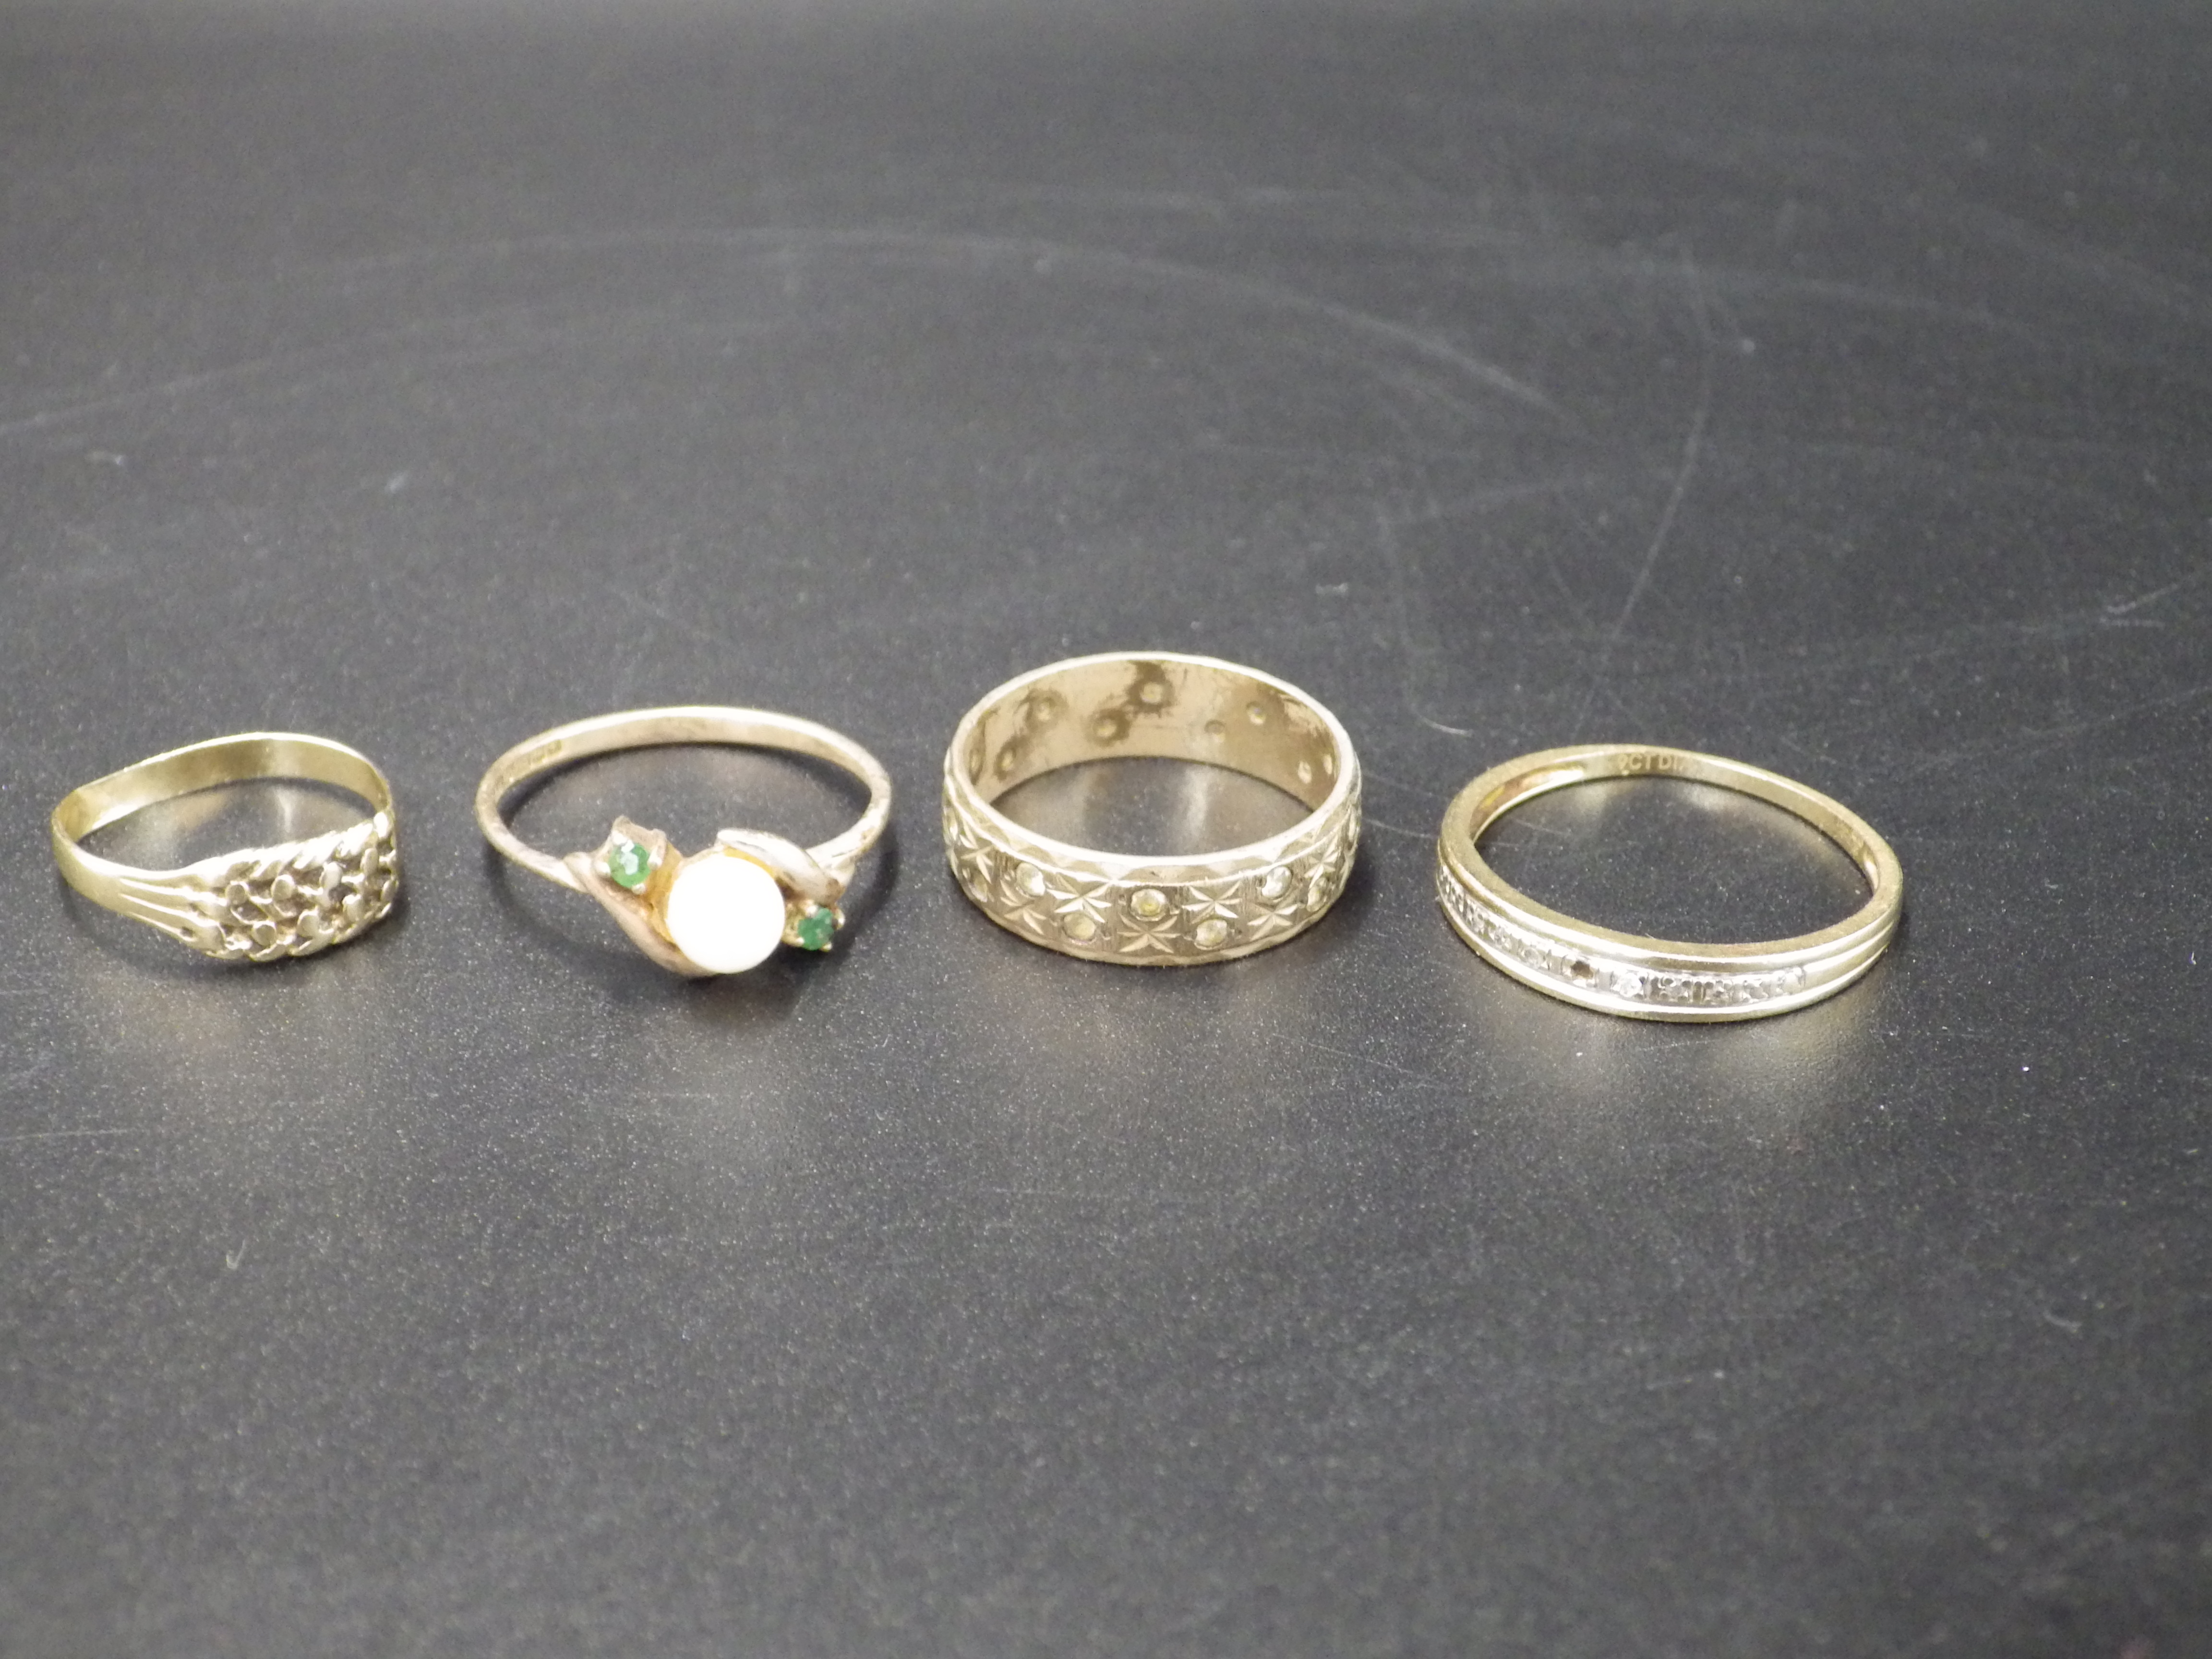 4, 9ct gold rings - smallest size H, band ring with CZ (one stone missing) size O, 'pearl' ring size